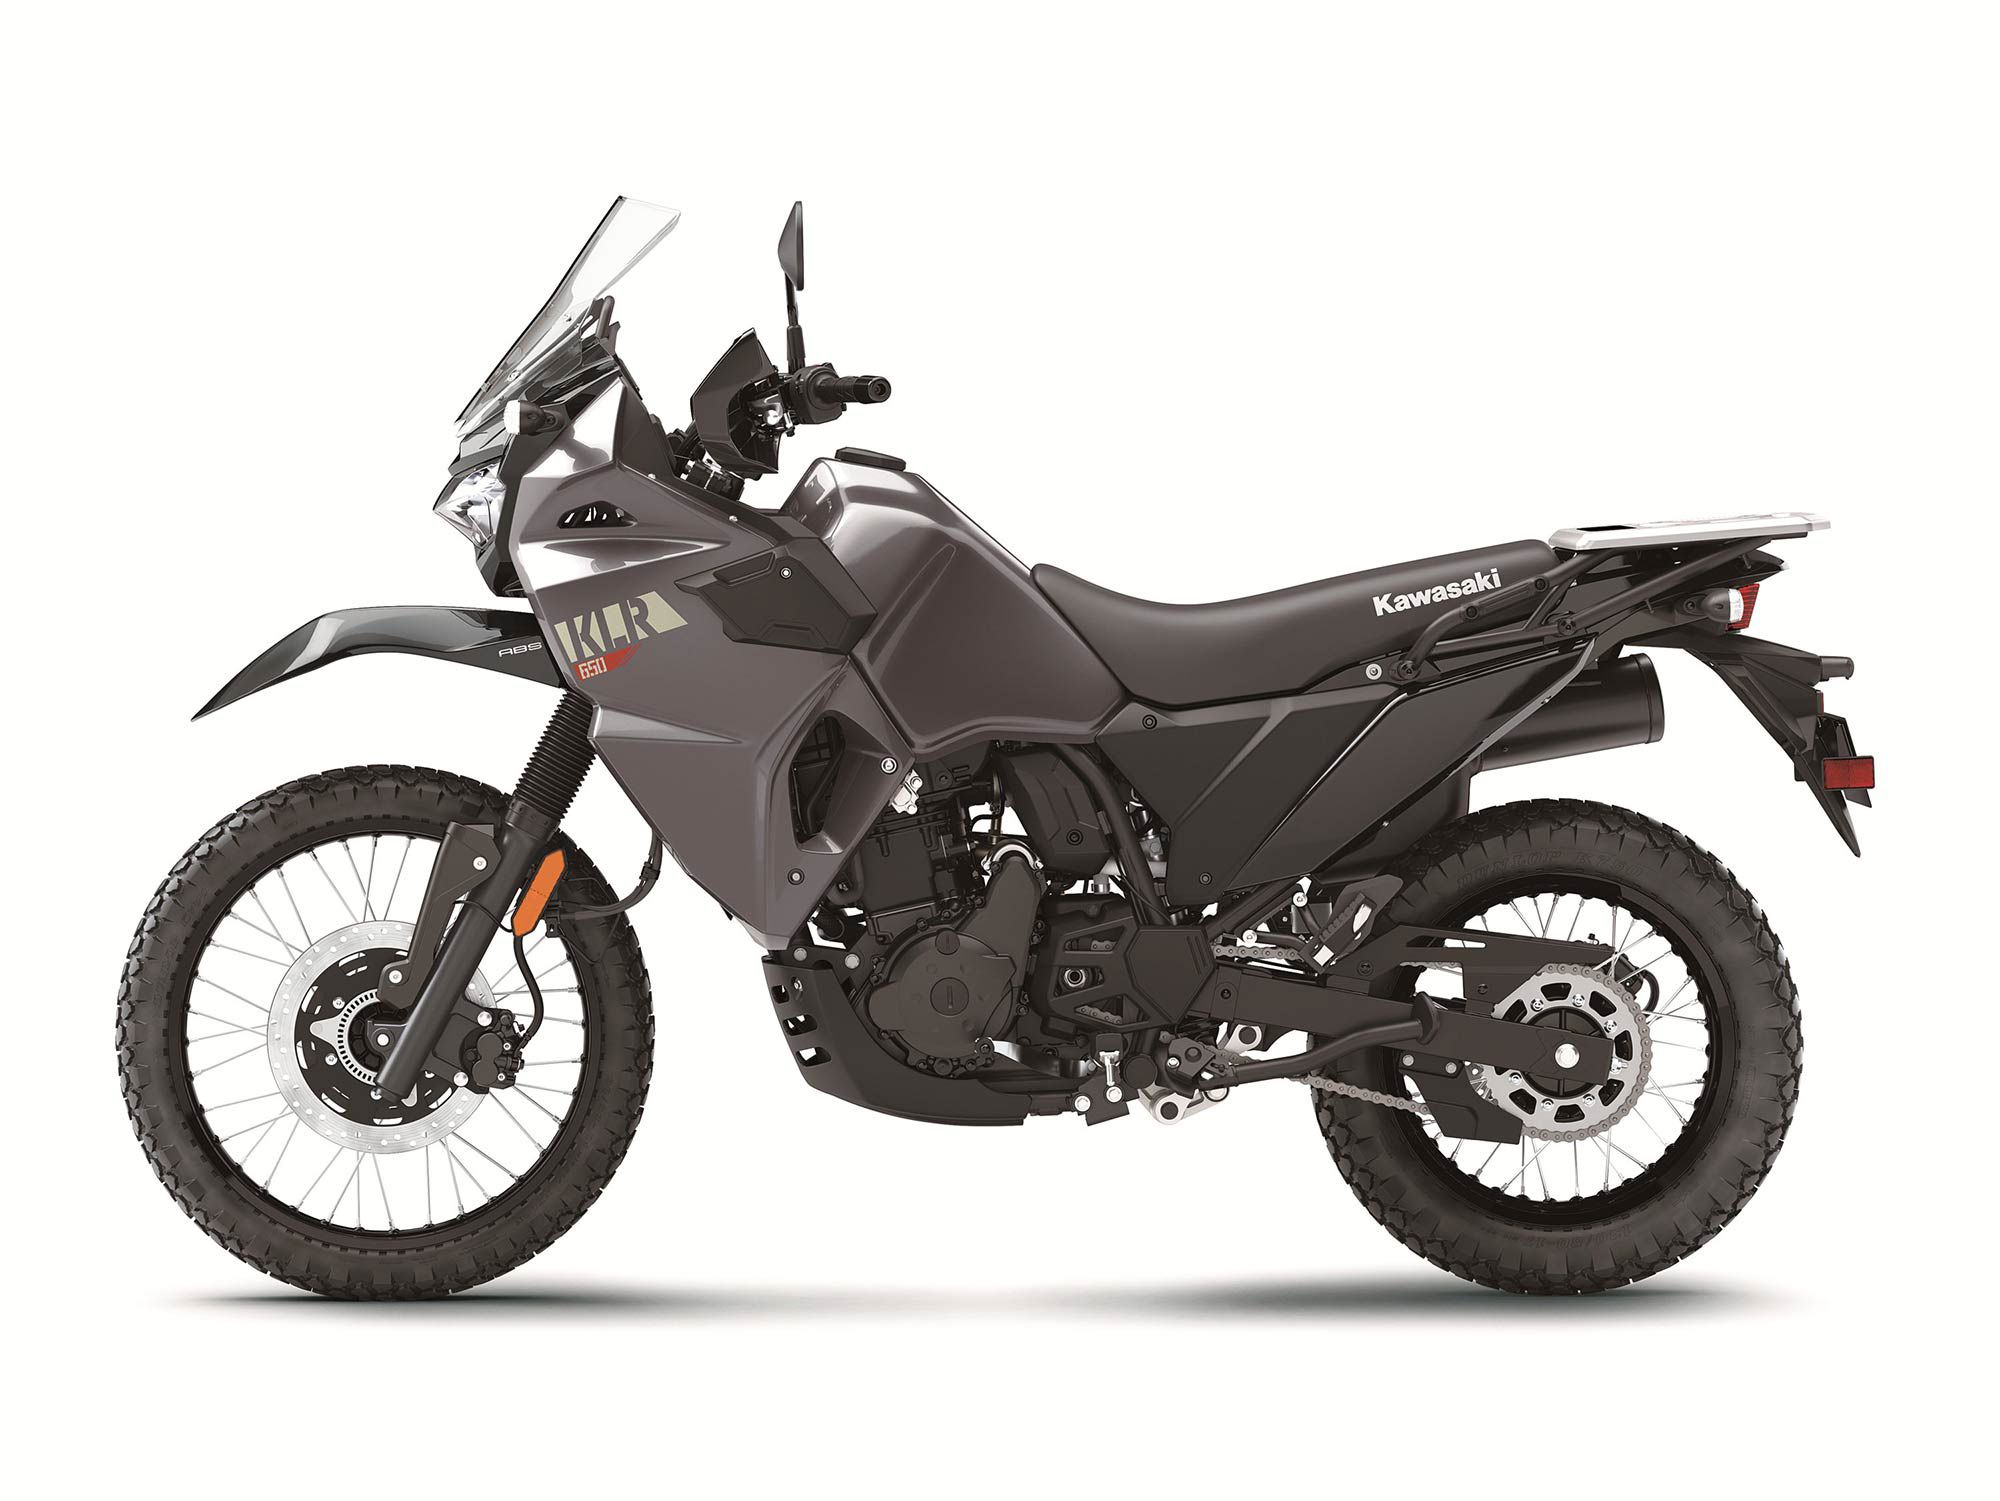 The KLR650 is capable of long slogs on the highway or clips down rocky dirt paths.